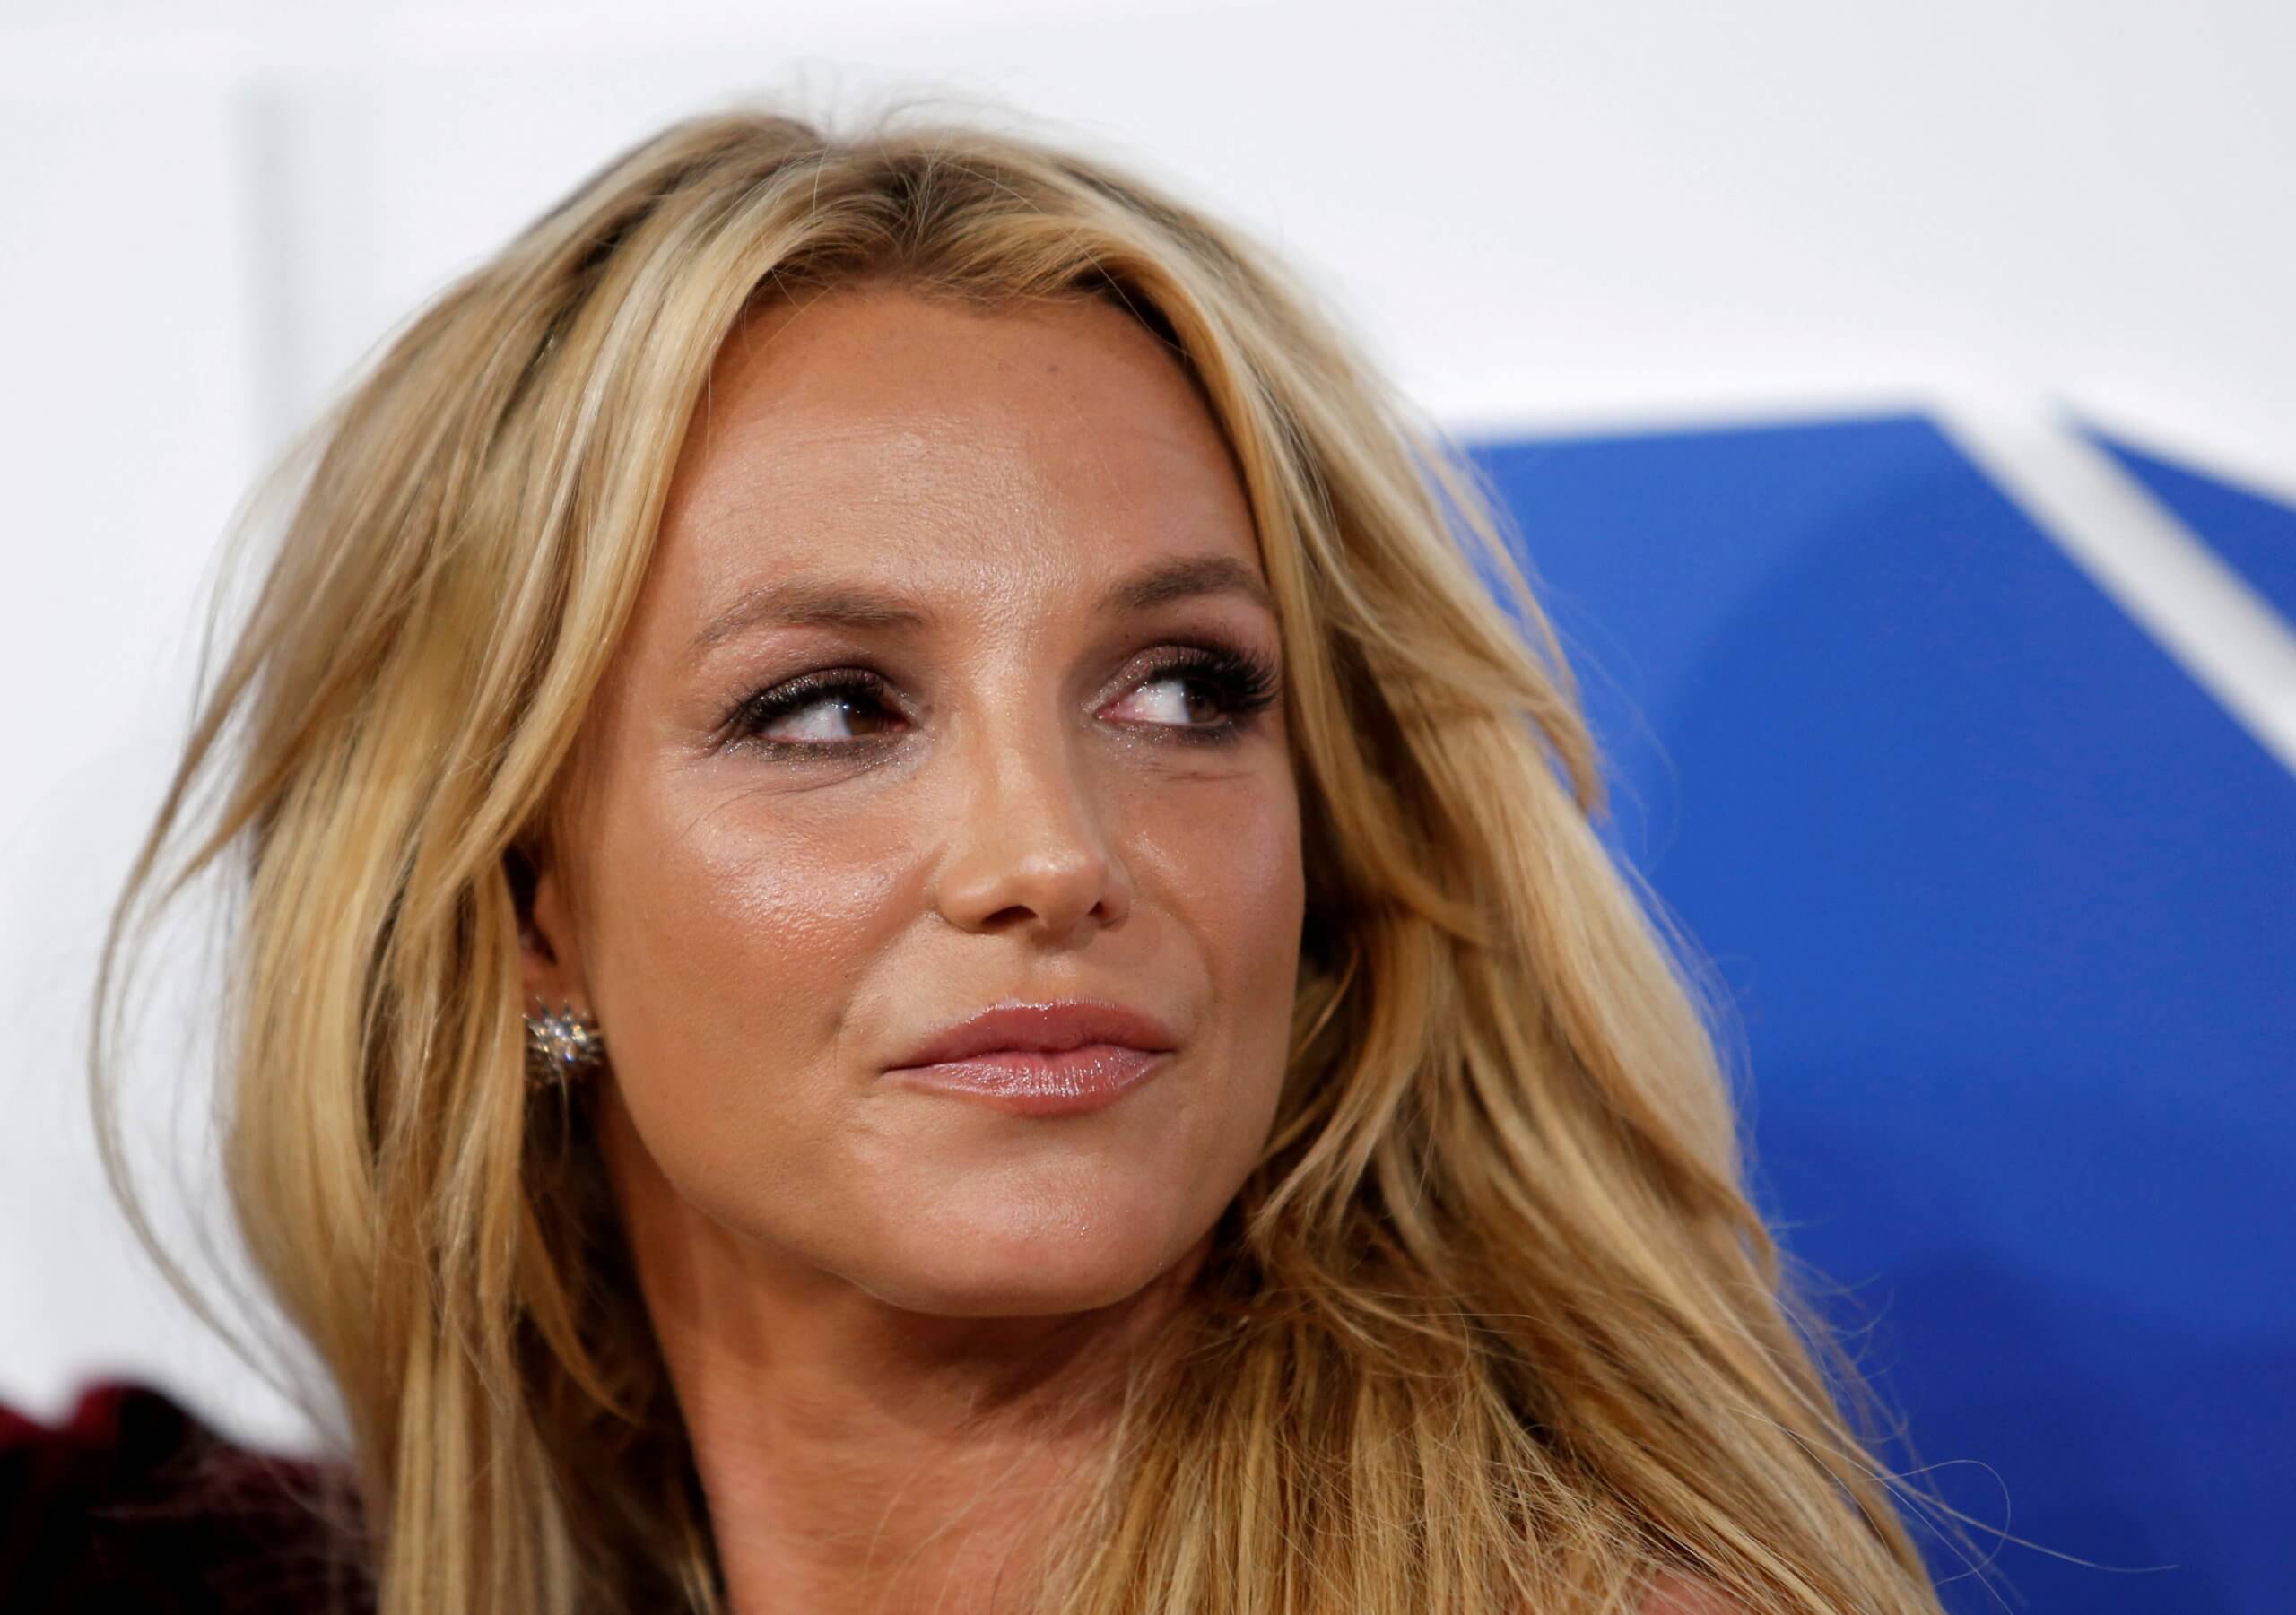 Britney Spears Is Unsure If She'll Ever Perform Onstage Again